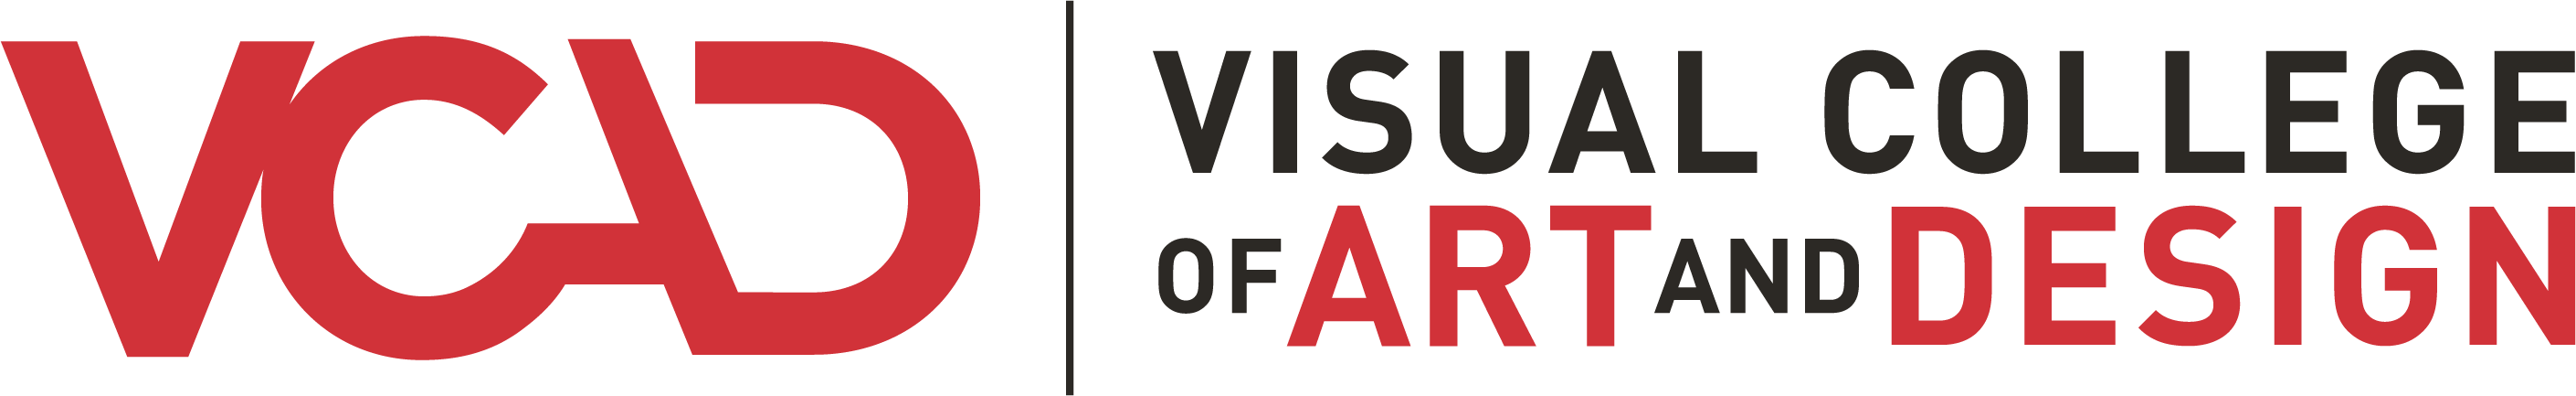 Visual College of Art and Design